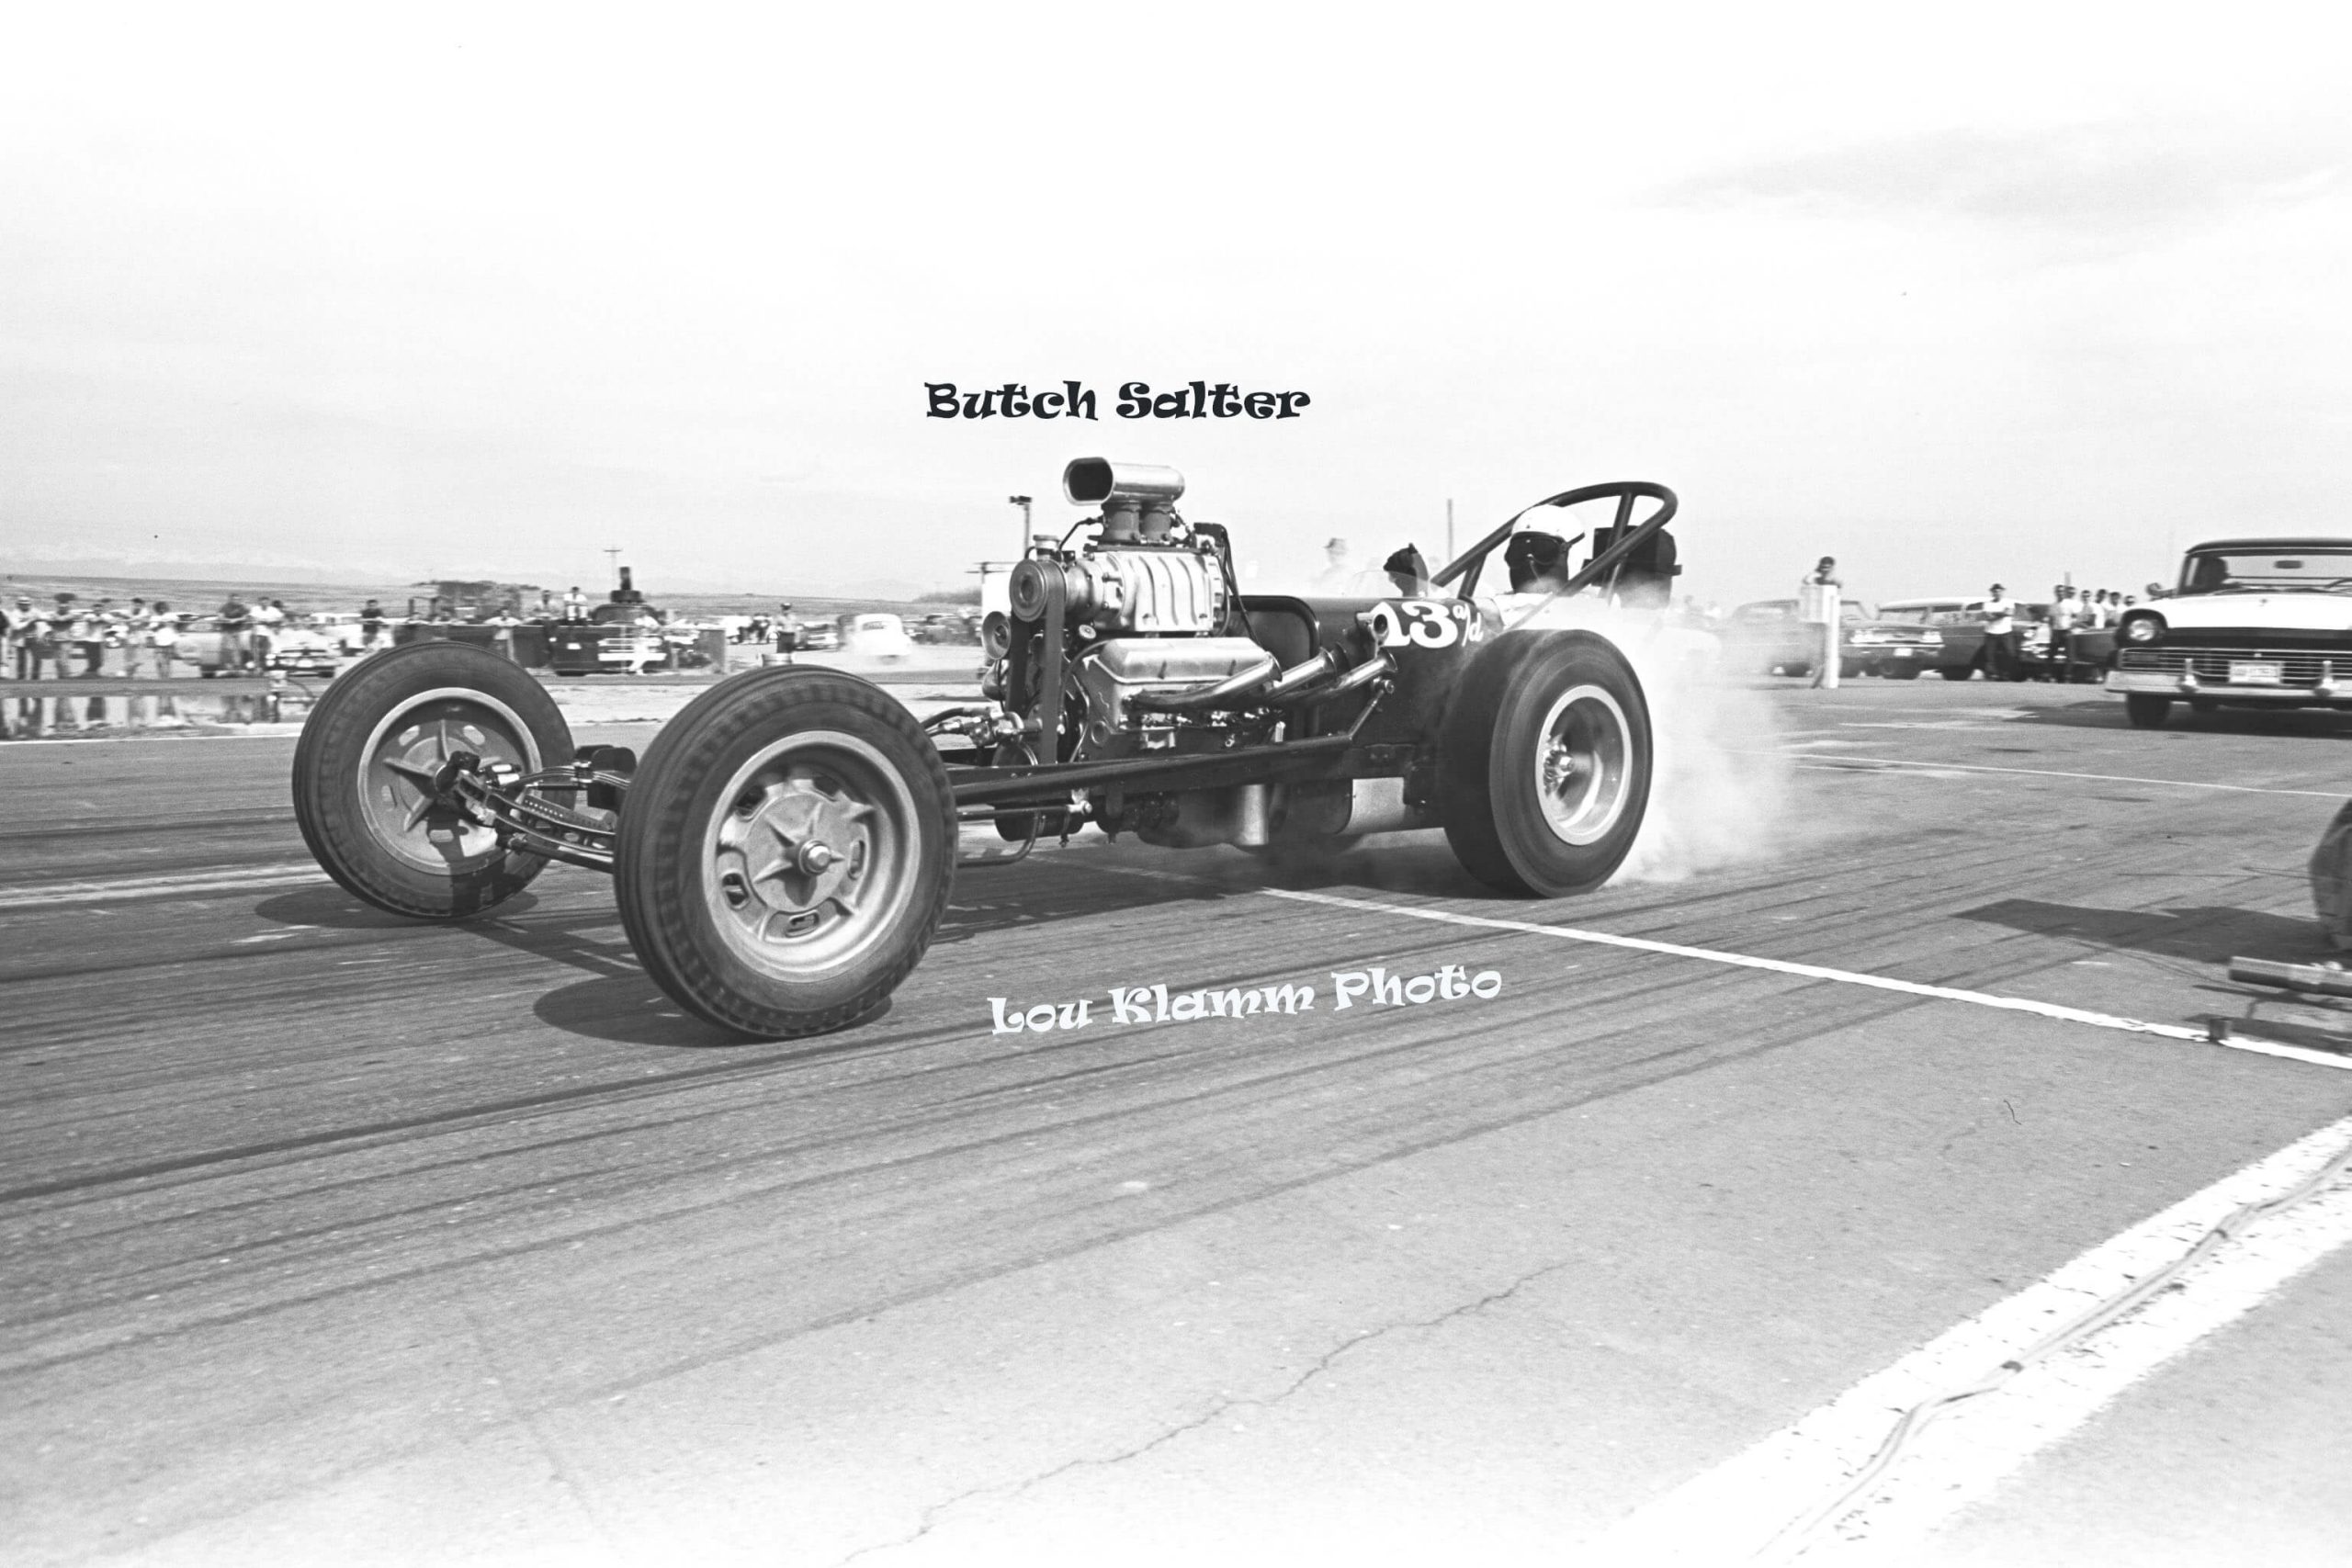 A picture of the Butch Salter motor car